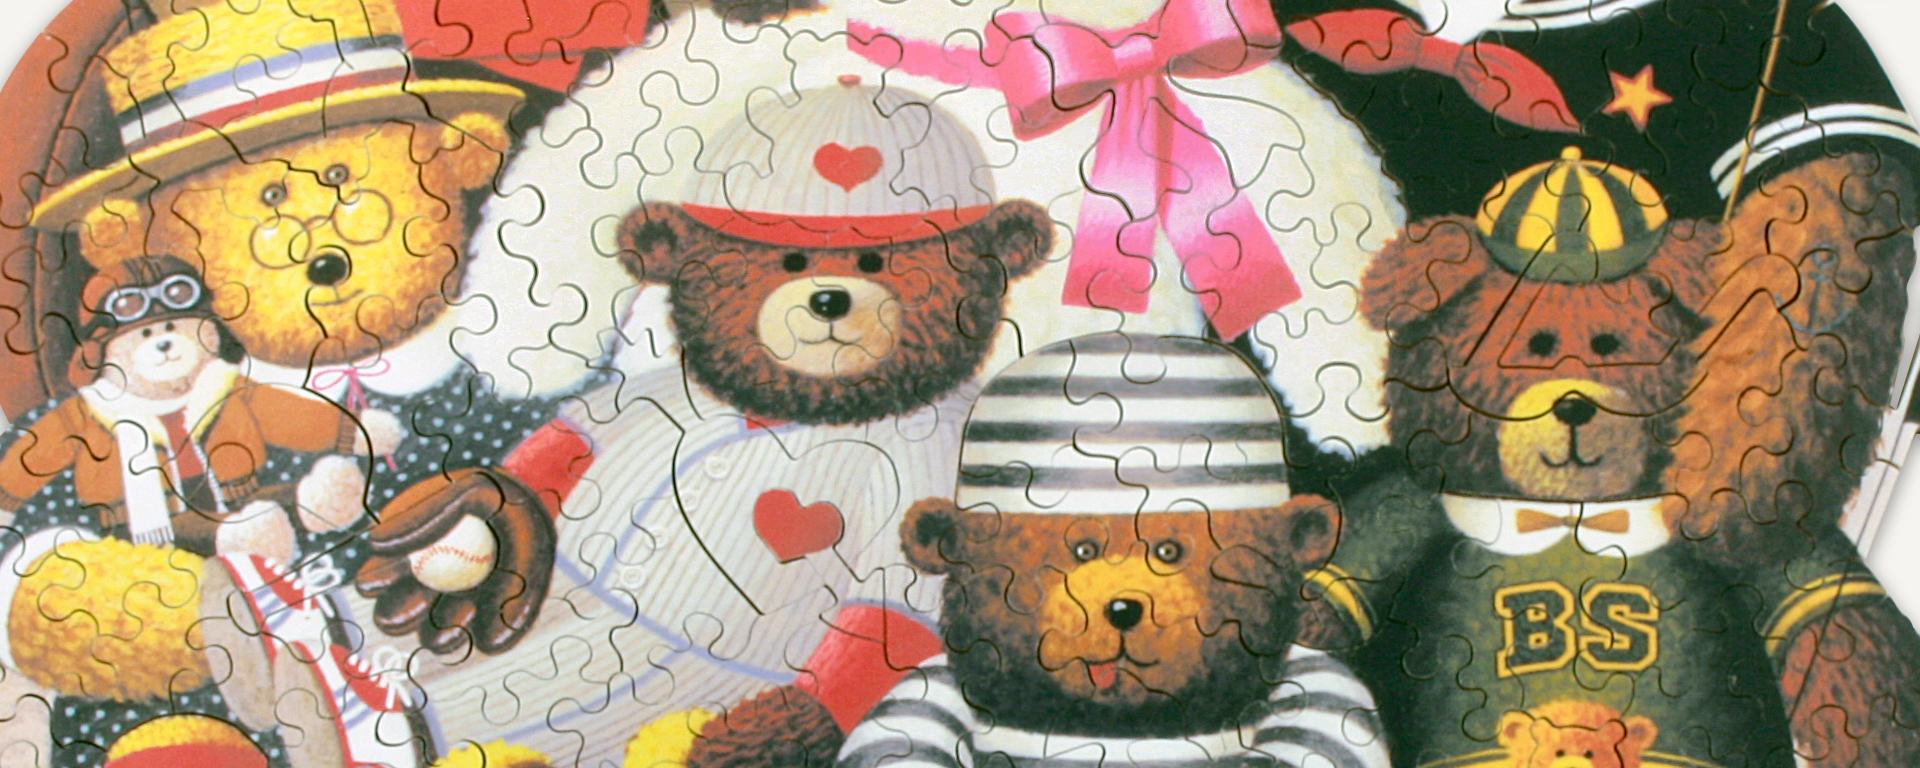 Wooden teddy bears puzzle featuring a variety of teddy bears in different sizes and outfits such as a pilot, prisoner, and a baseball player.